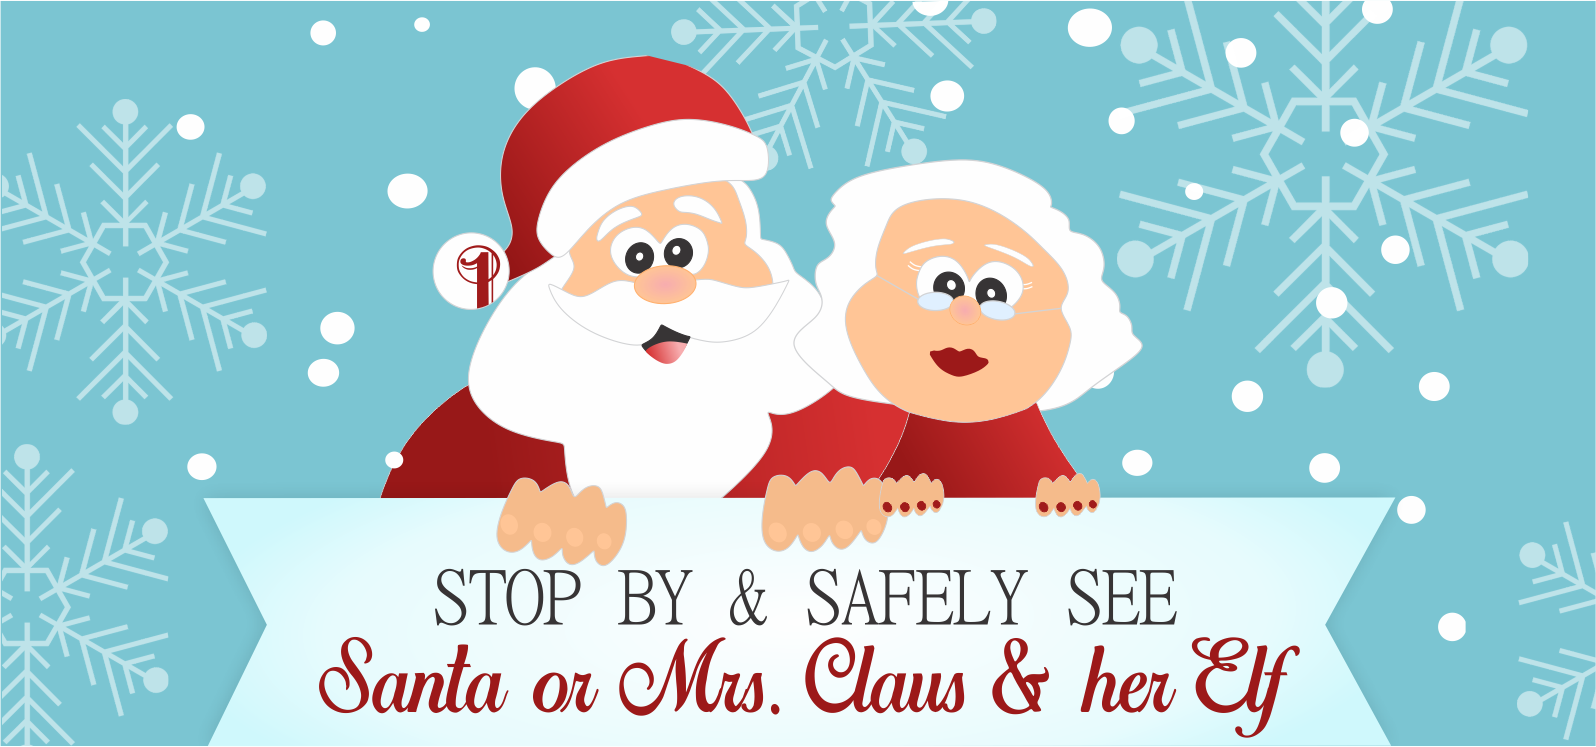 Cartoon image of Santa & Mrs. Claus - ad for our event(s).